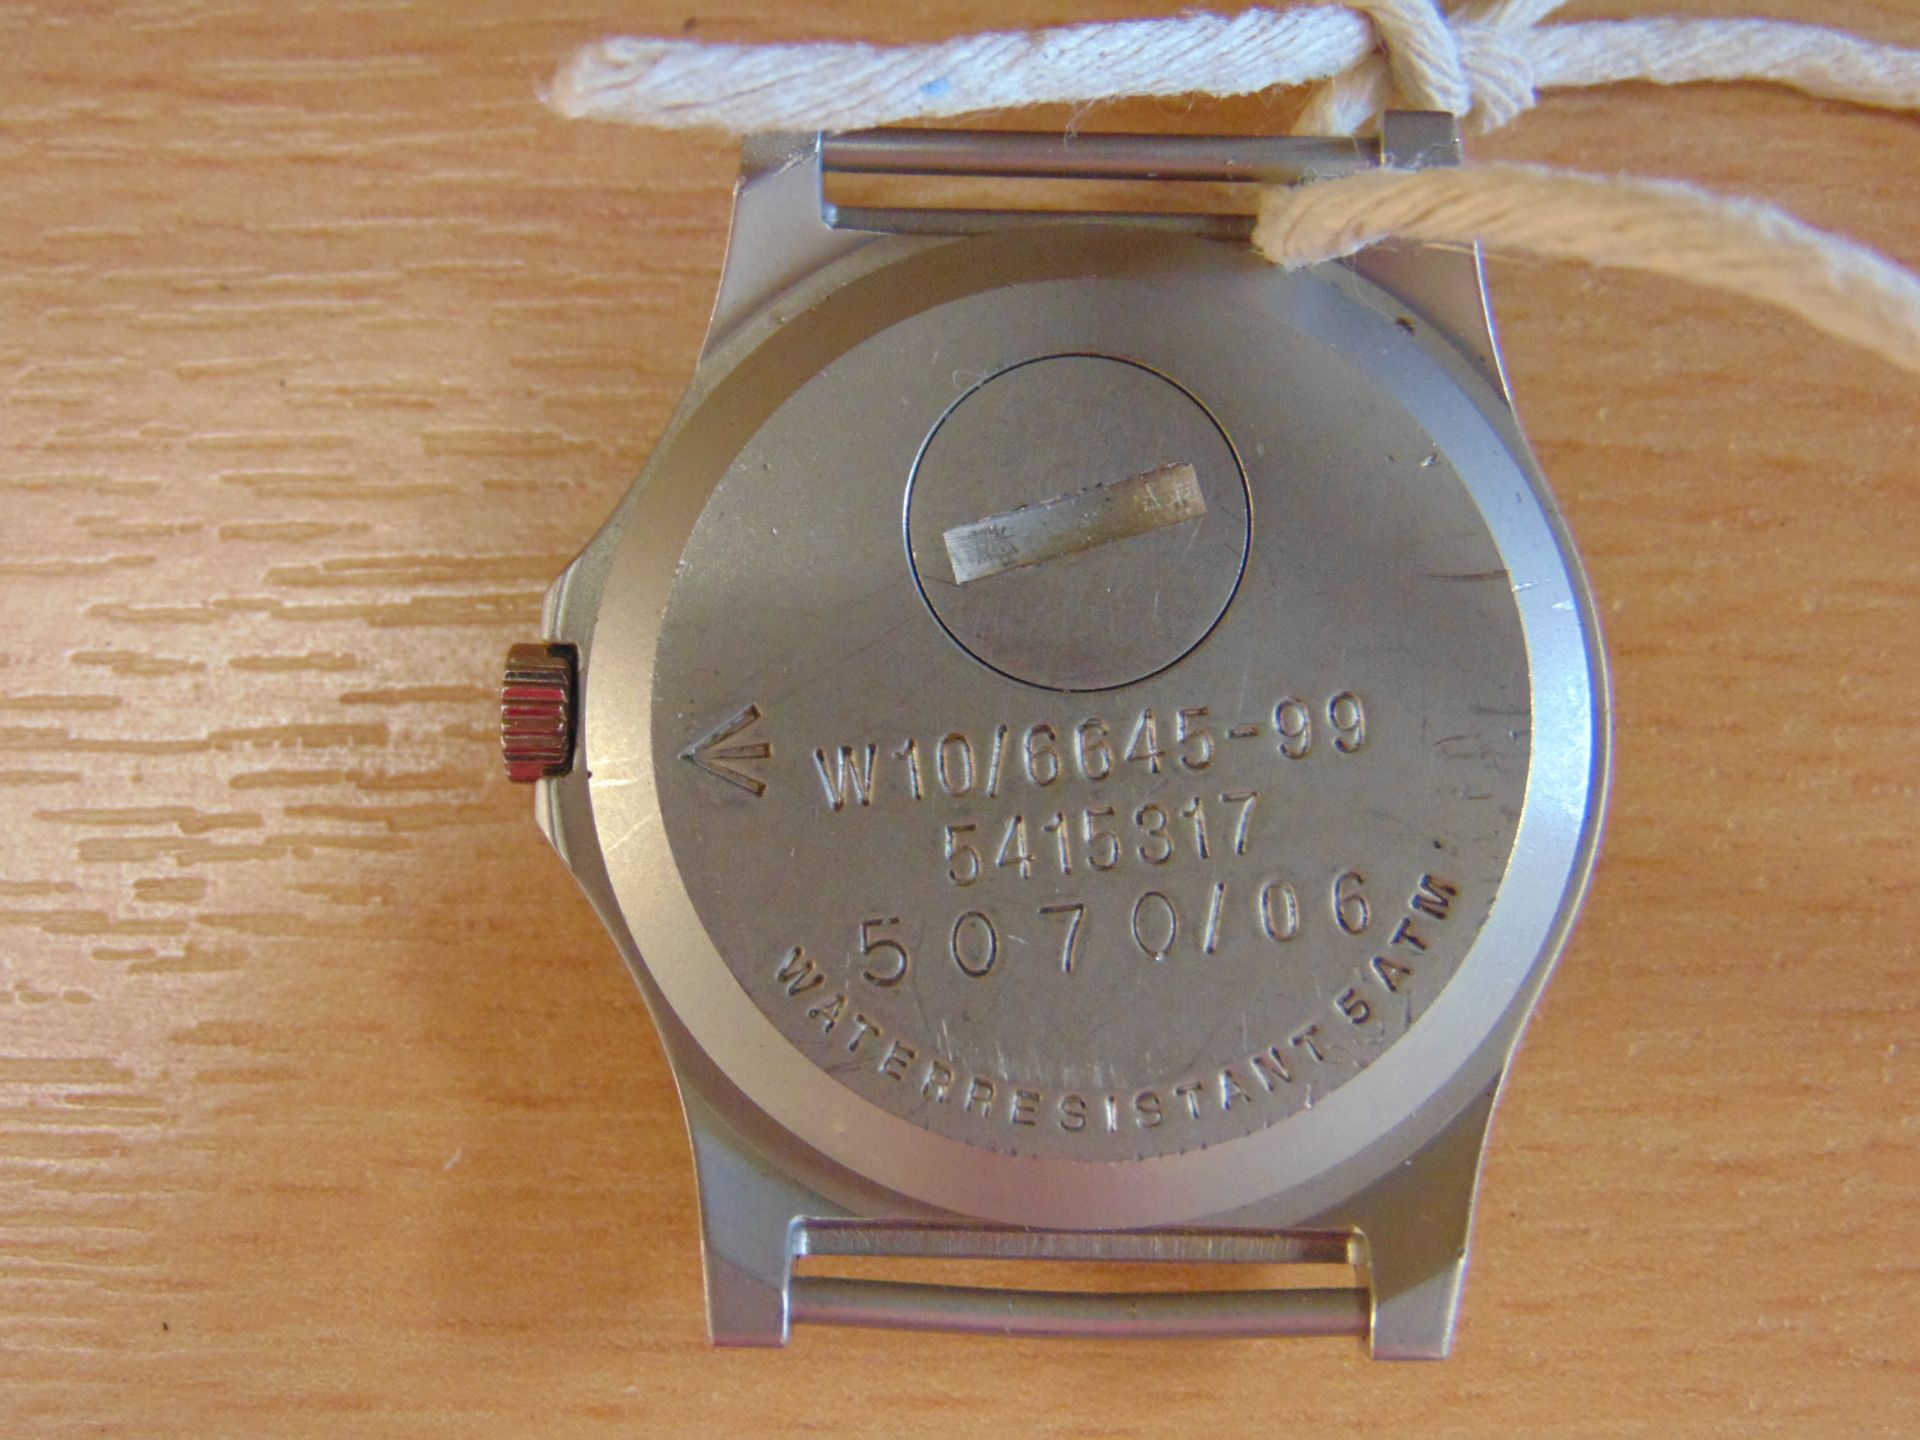 CWC W10 BRITISH ARMY SERVICE WATCH NATO MARKS DATE 2006 WATER RESISTANT TO 5 ATM - Image 4 of 5